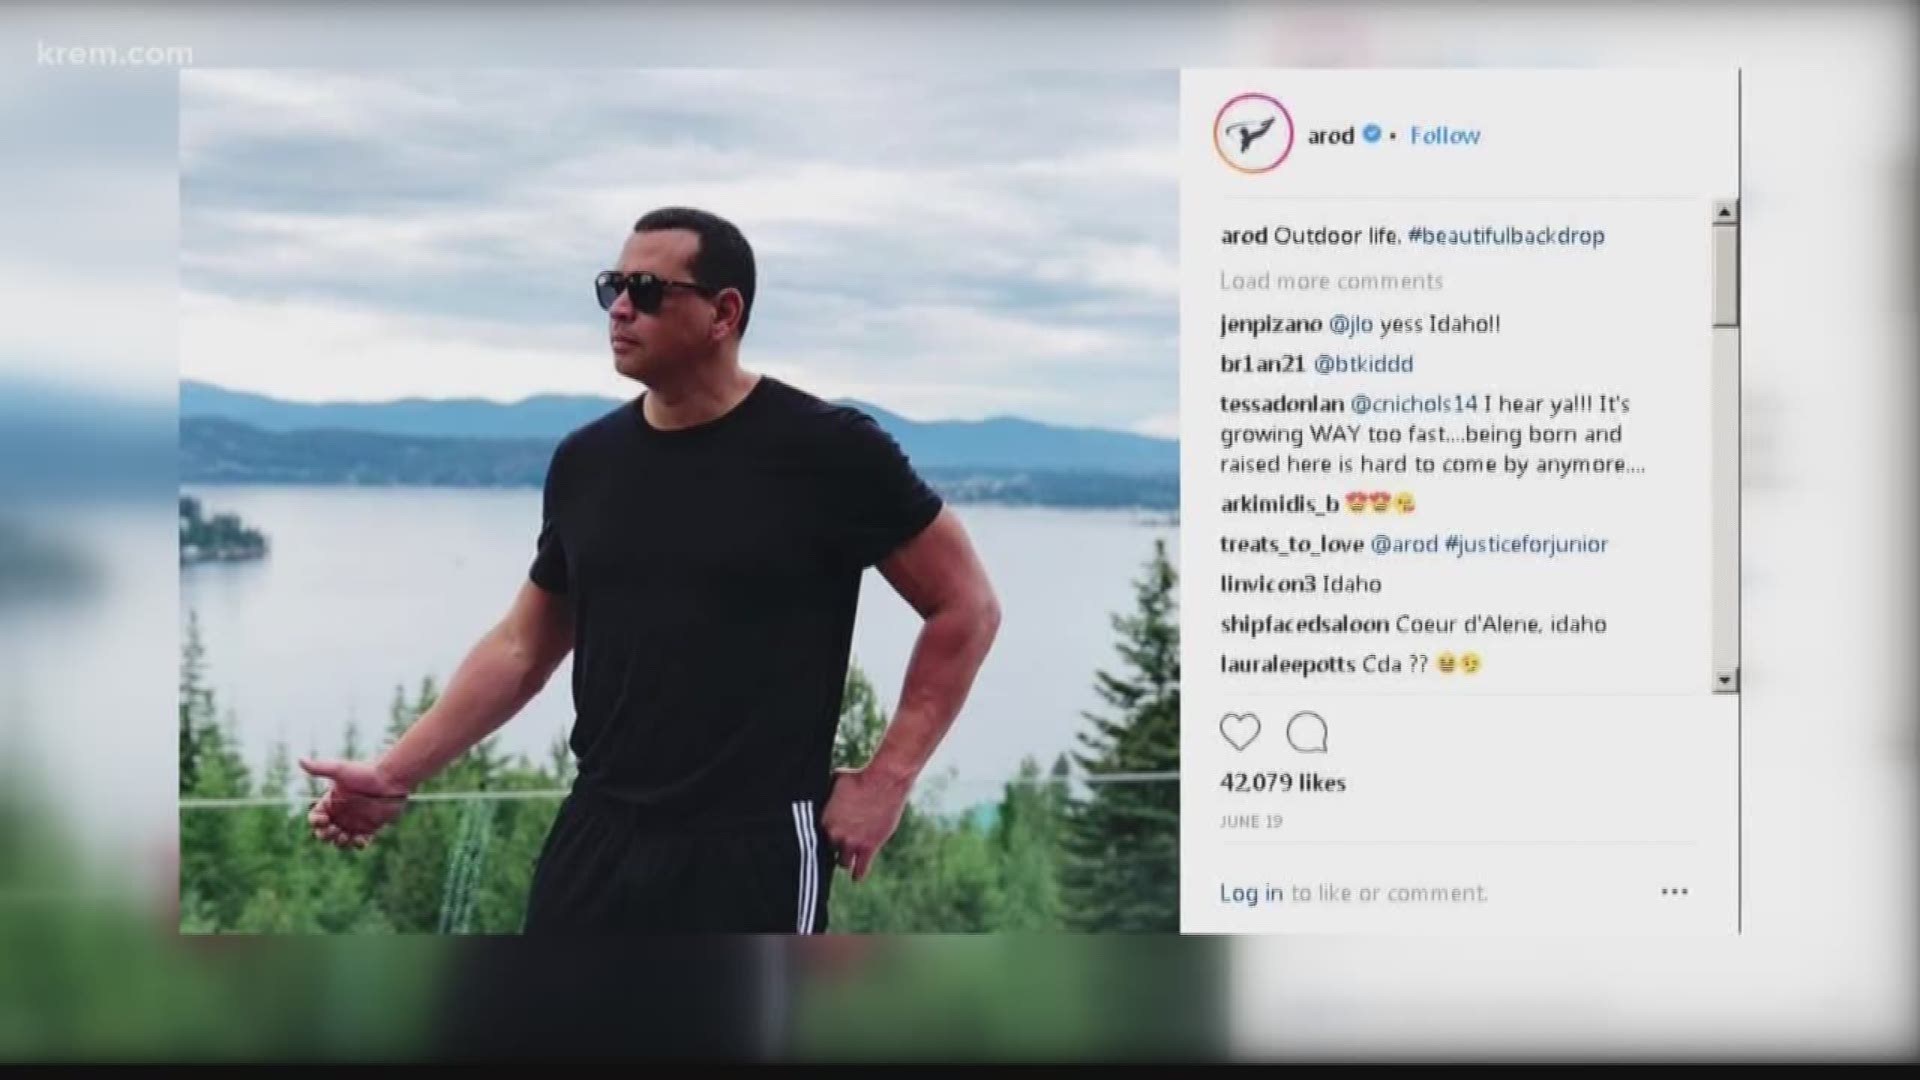 Recently, rumors surfaced that several pop stars, athletes and even a member of the Kardashian family have been making their way to the quiet side of North Idaho.